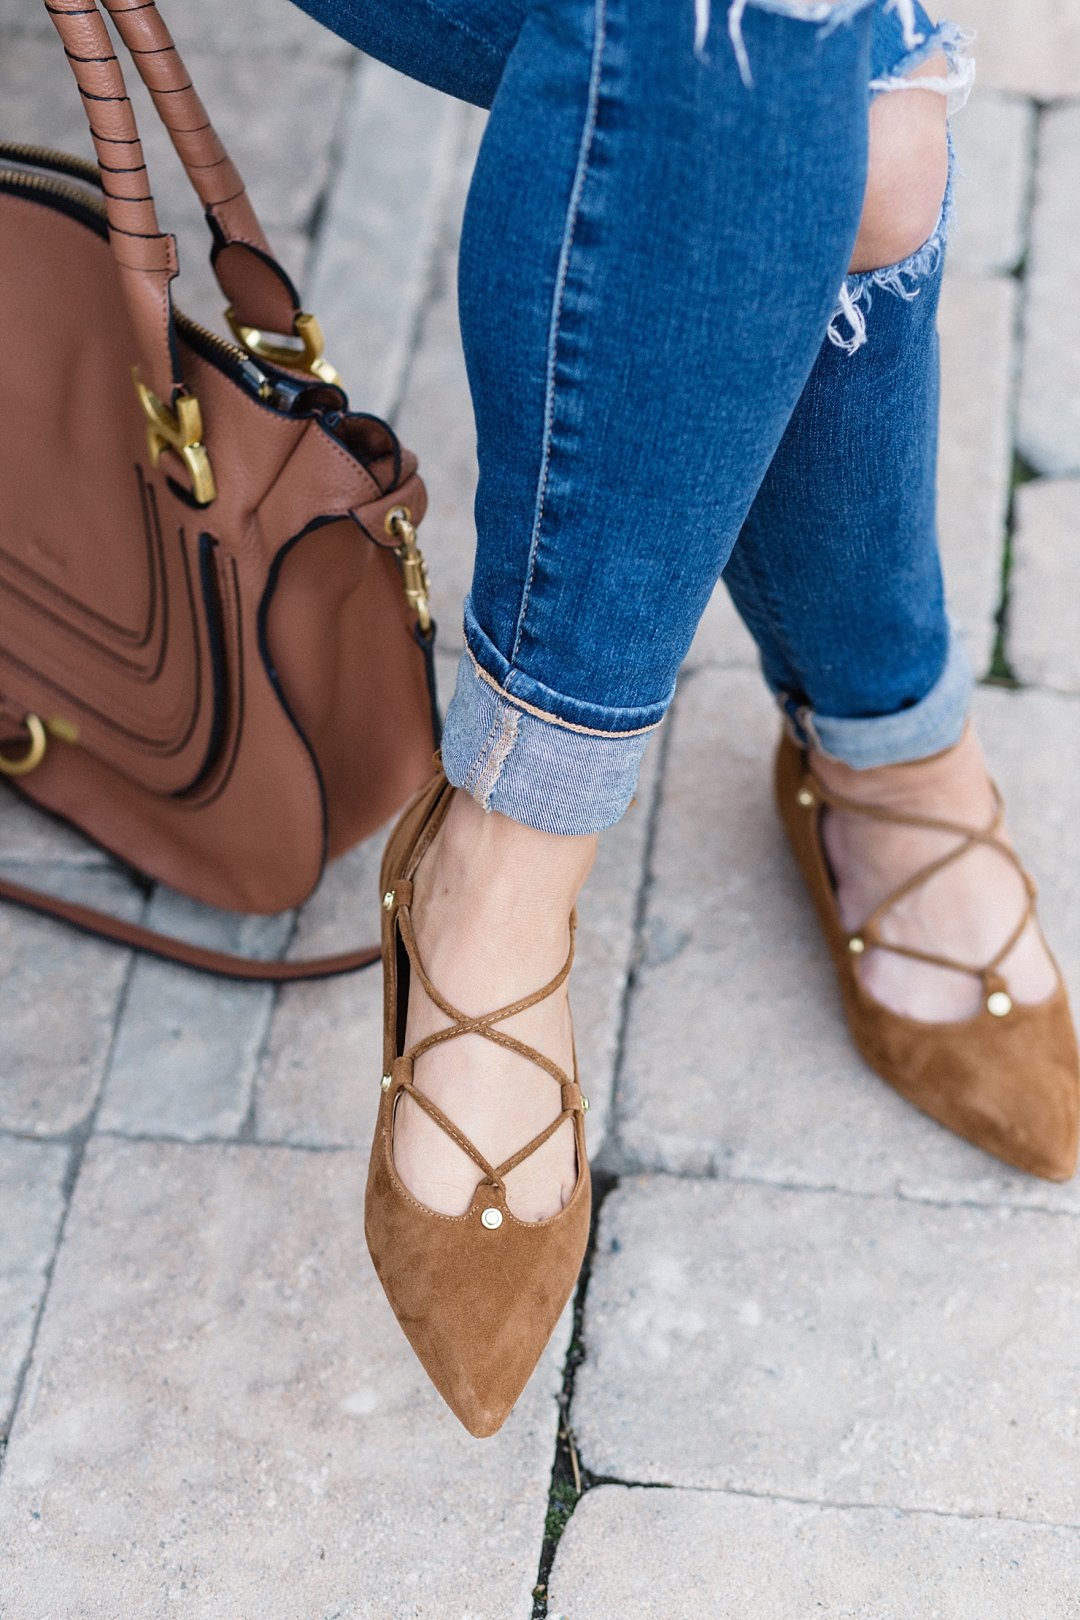 cognac suede lace up flats, comfy fall brown flats, lace up shoe trend, chloe Maurcie bag in tan, distressed jeans rolled up and lace up flats